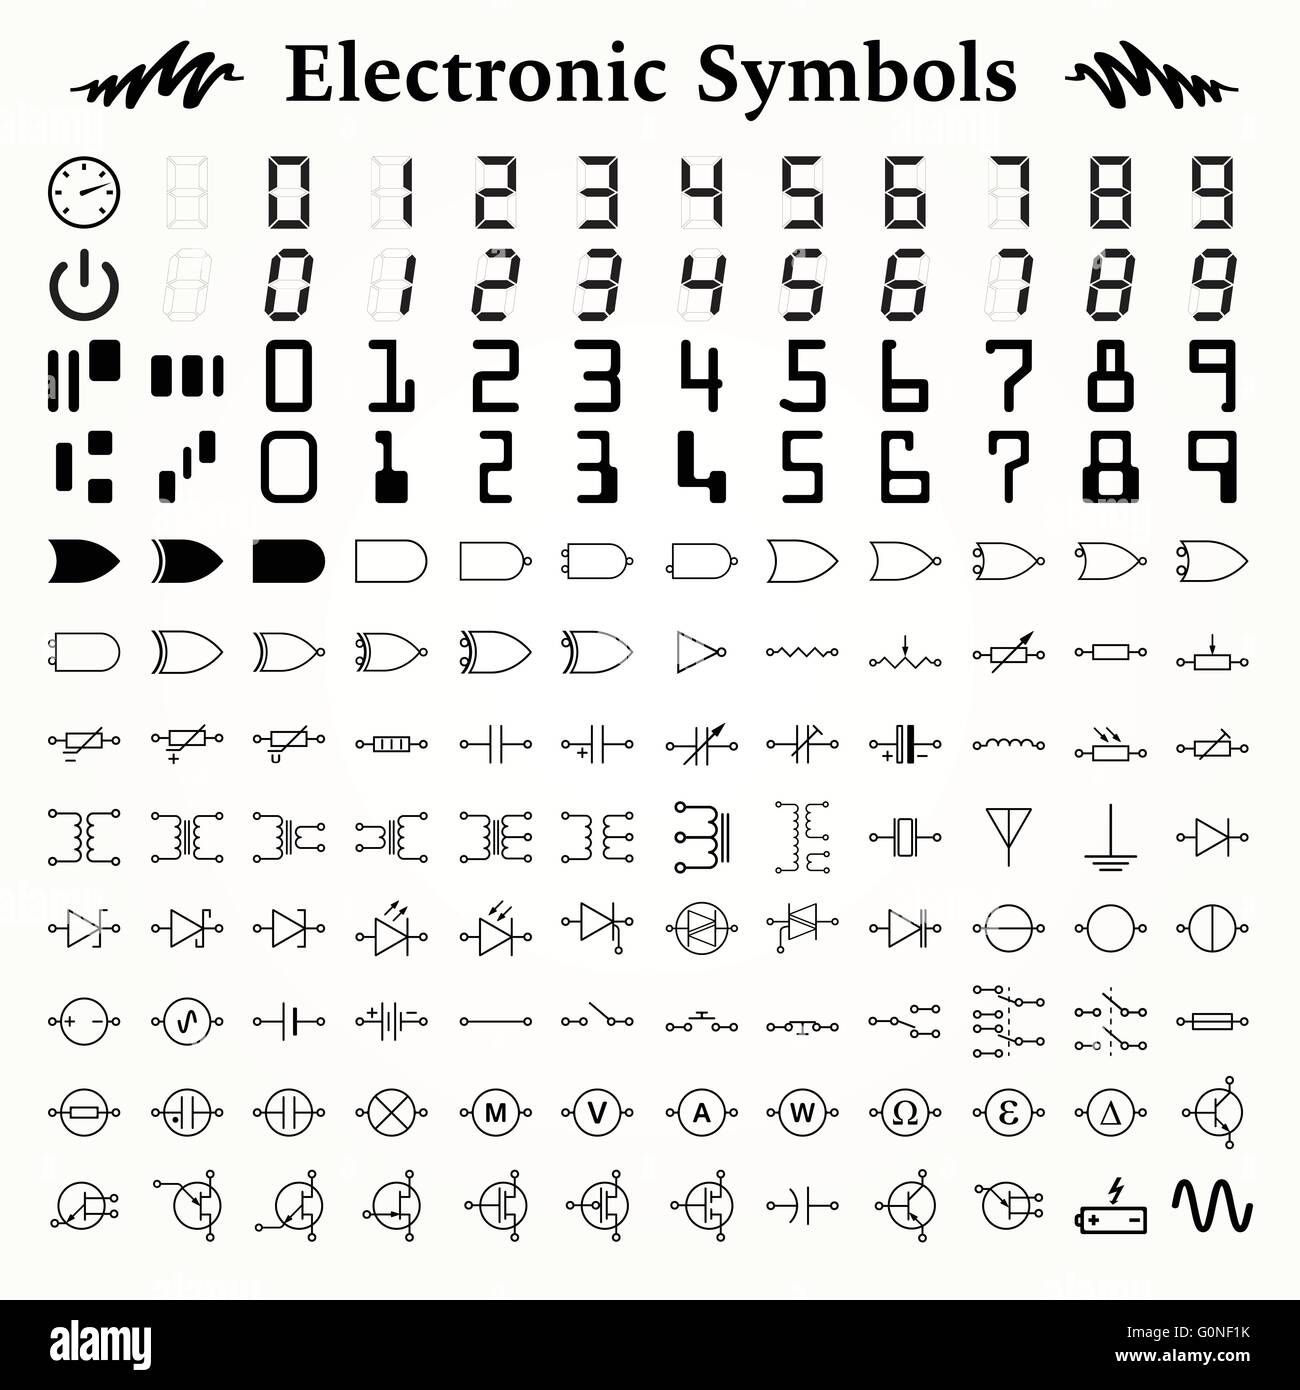 Elements of electronic symbols, icons and signs Stock Vector